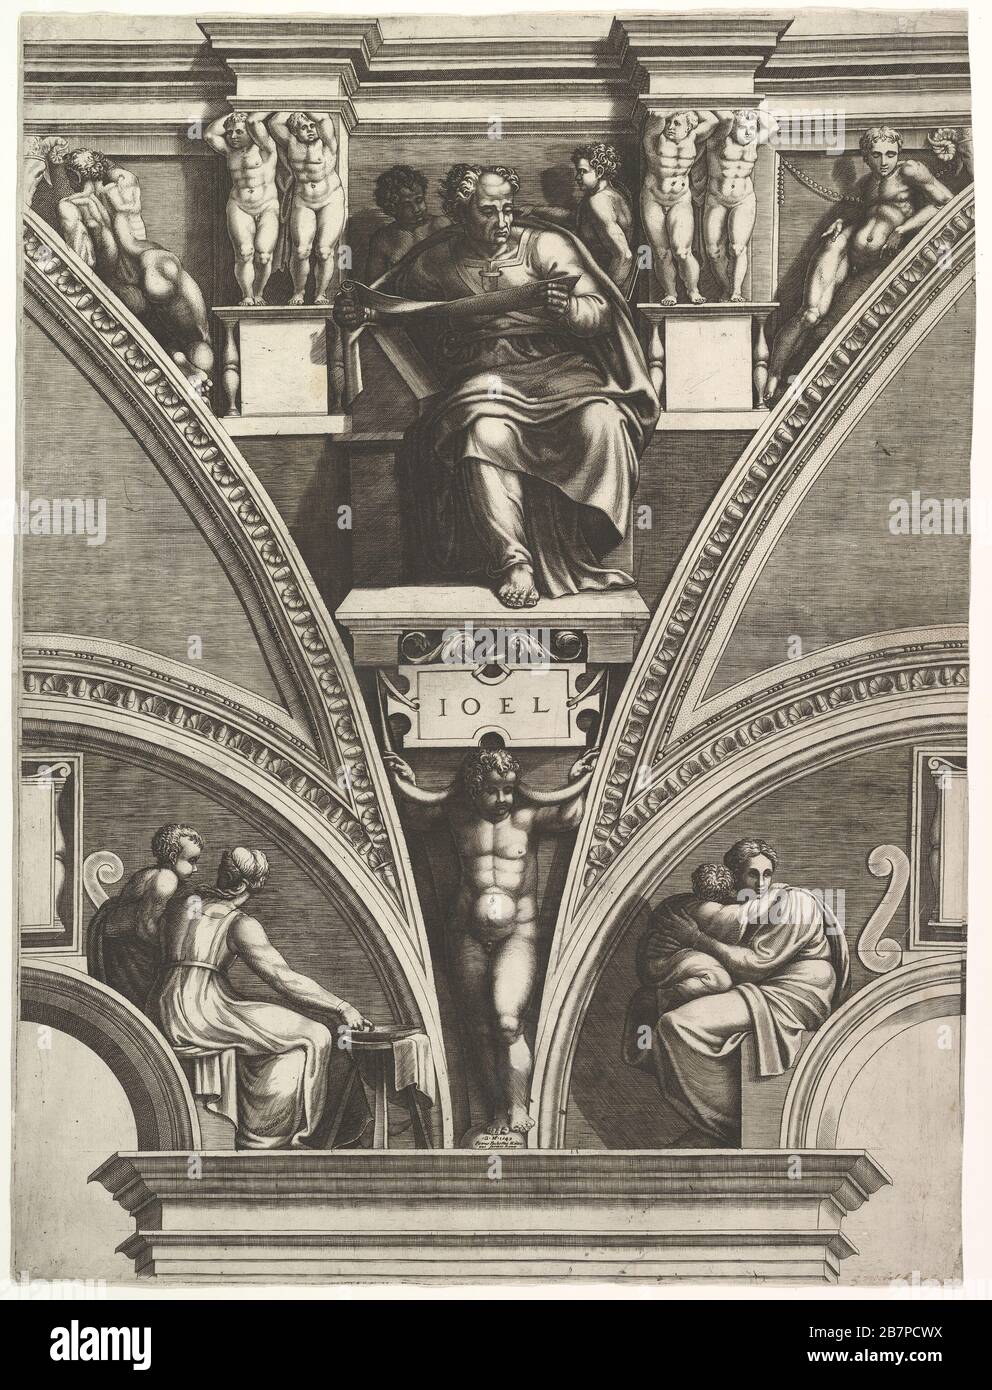 The Prophet Joel; from the series of Prophets and Sibyls in the Sistine Chapel, 1570-75. After Michelangelo Buonarroti Stock Photo